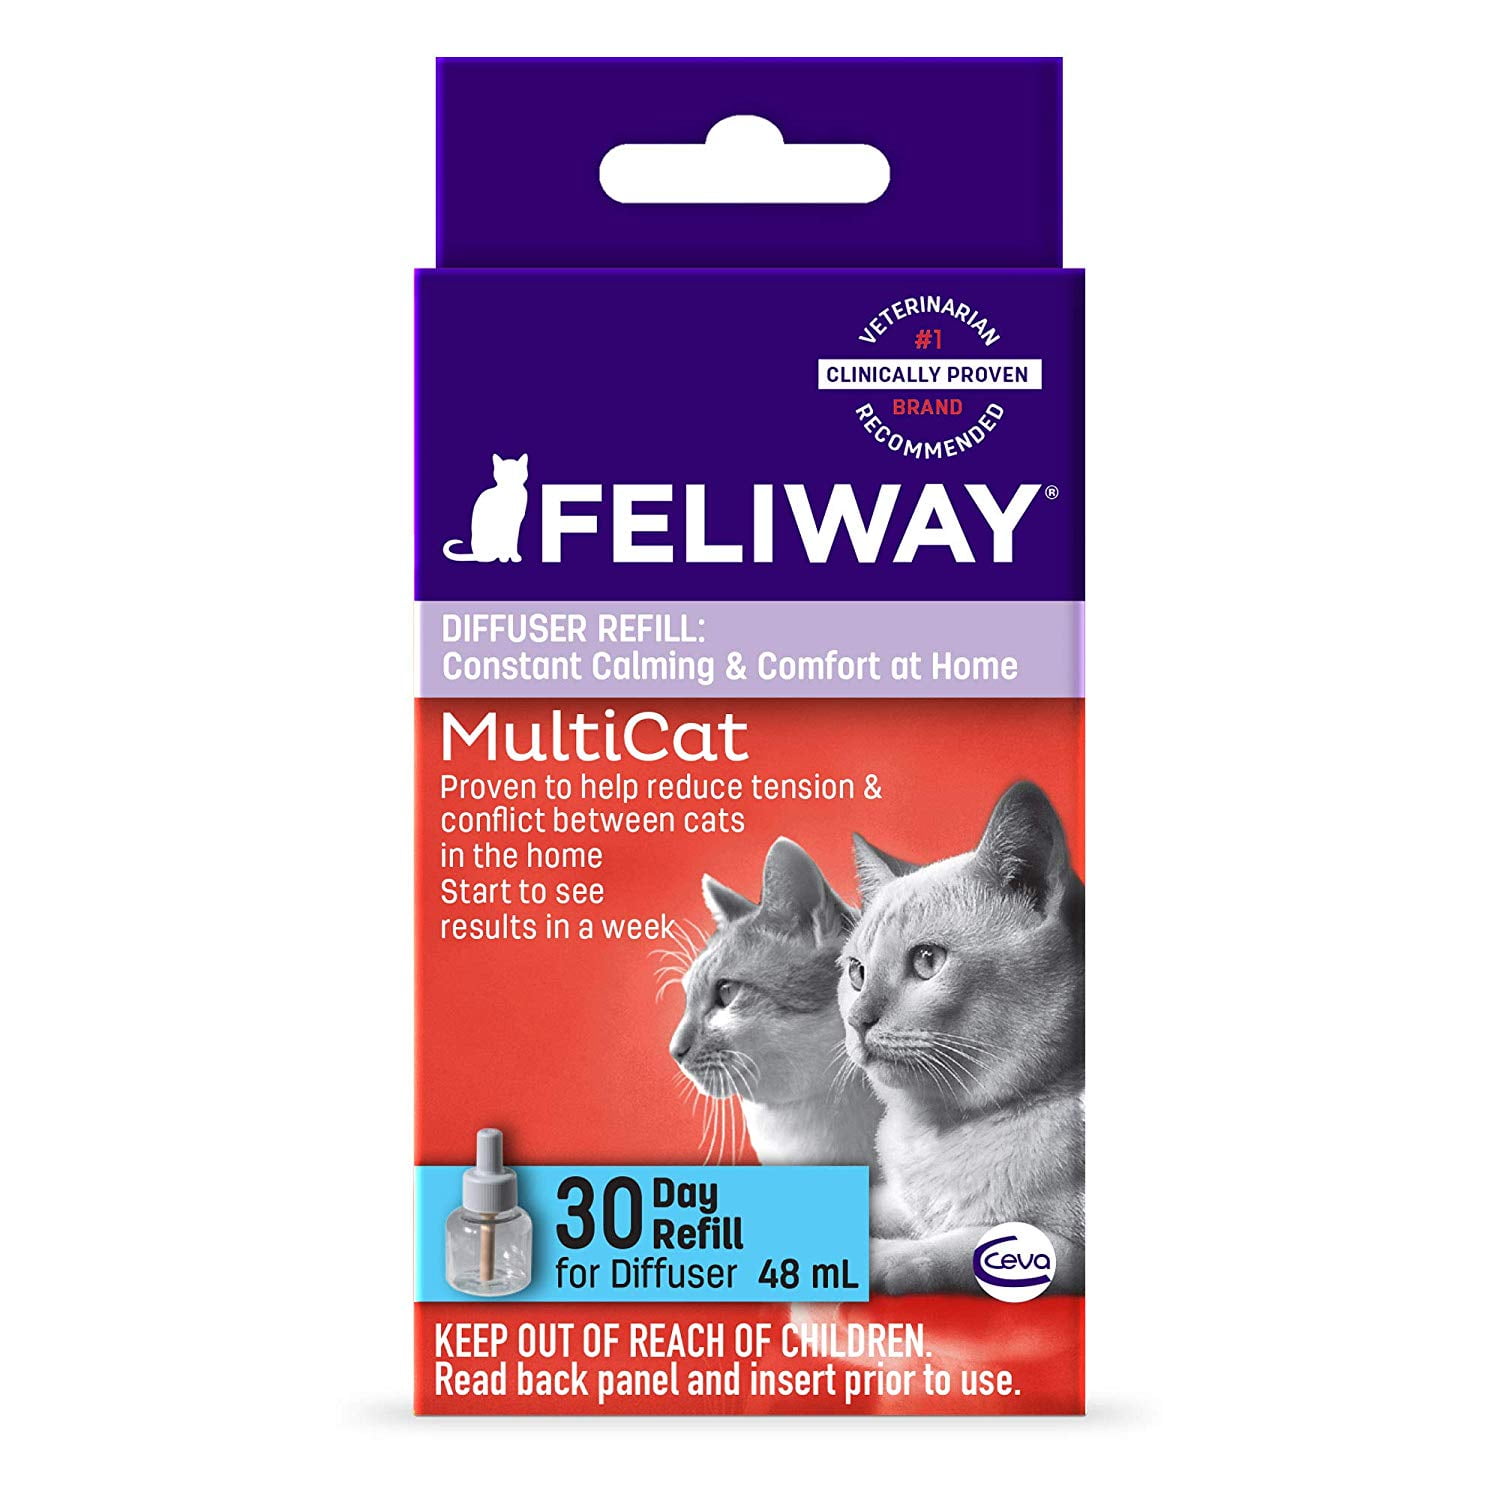 Feliway MultiCat 30 Day Diffuser Refill for Cats